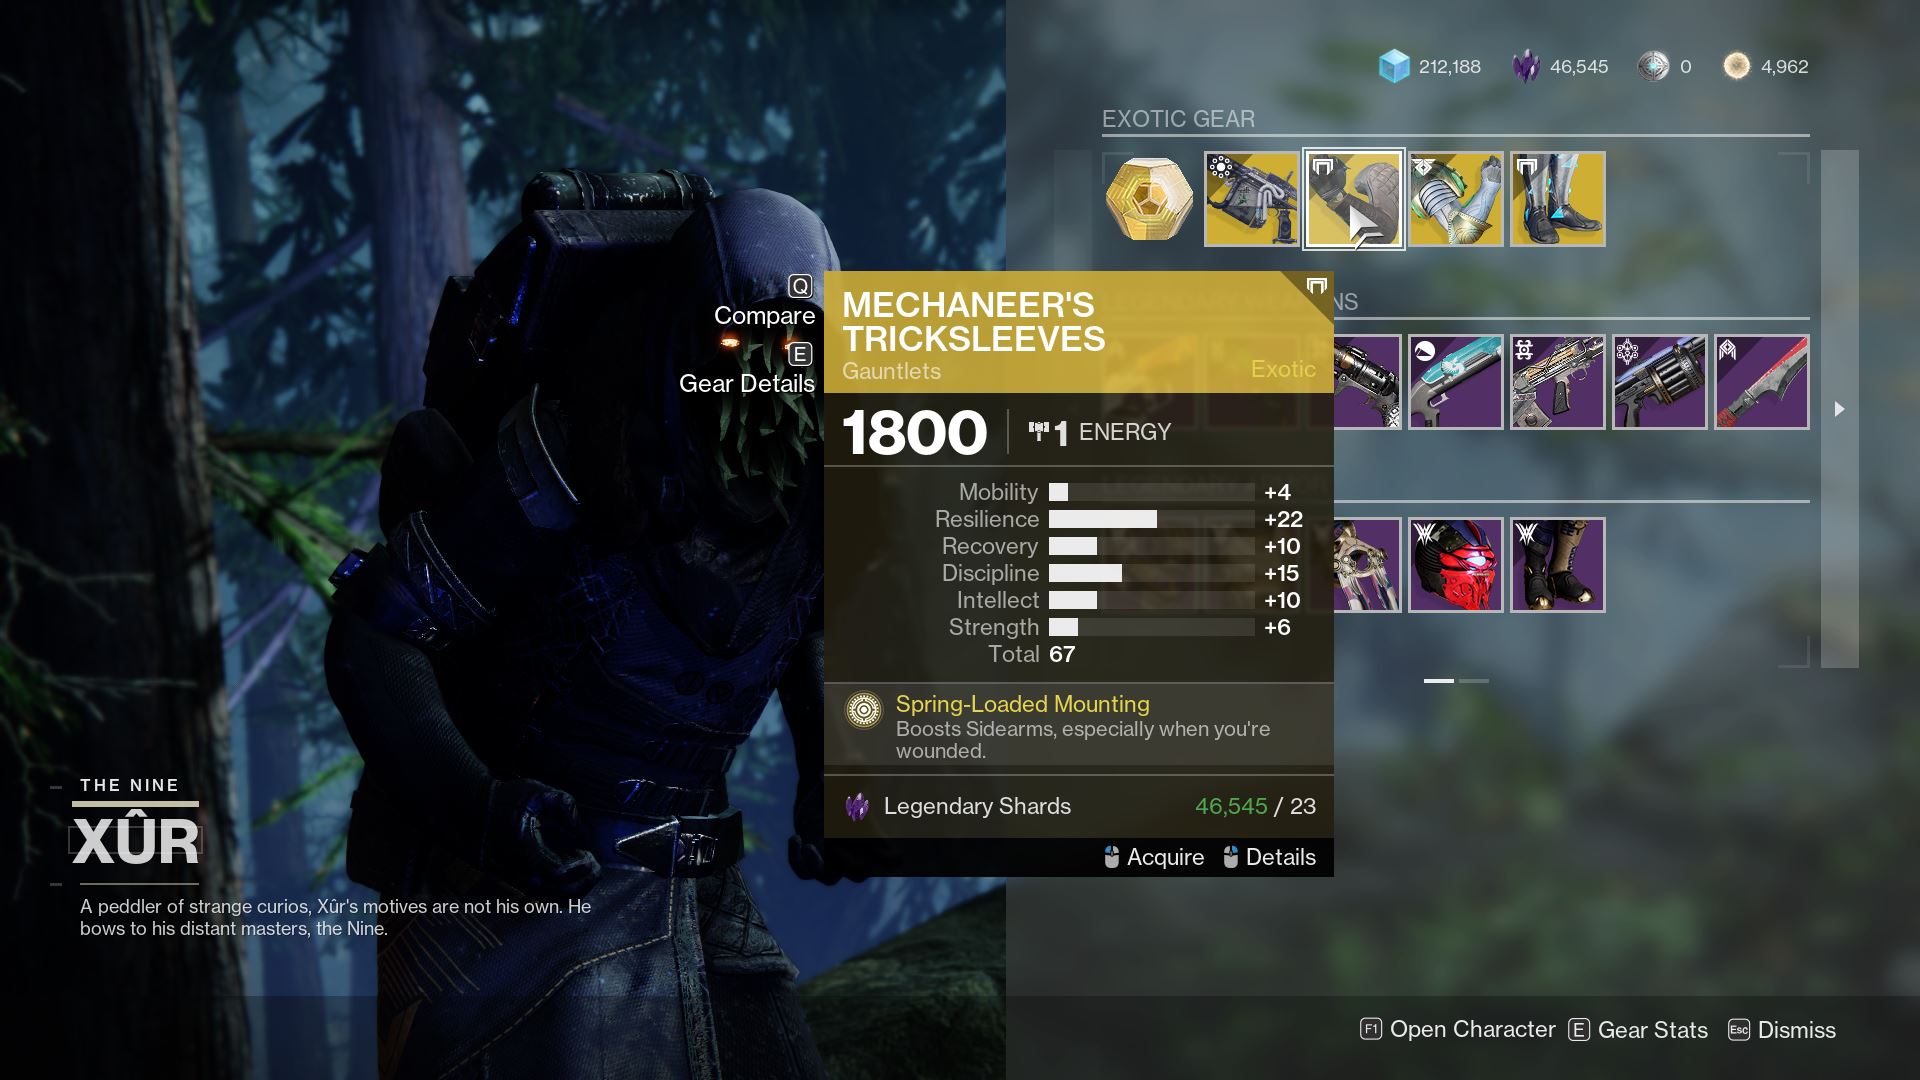 Where Is Xur Today In Destiny 2? Location And Exotic Inventory (Nov 3 - Nov 7)